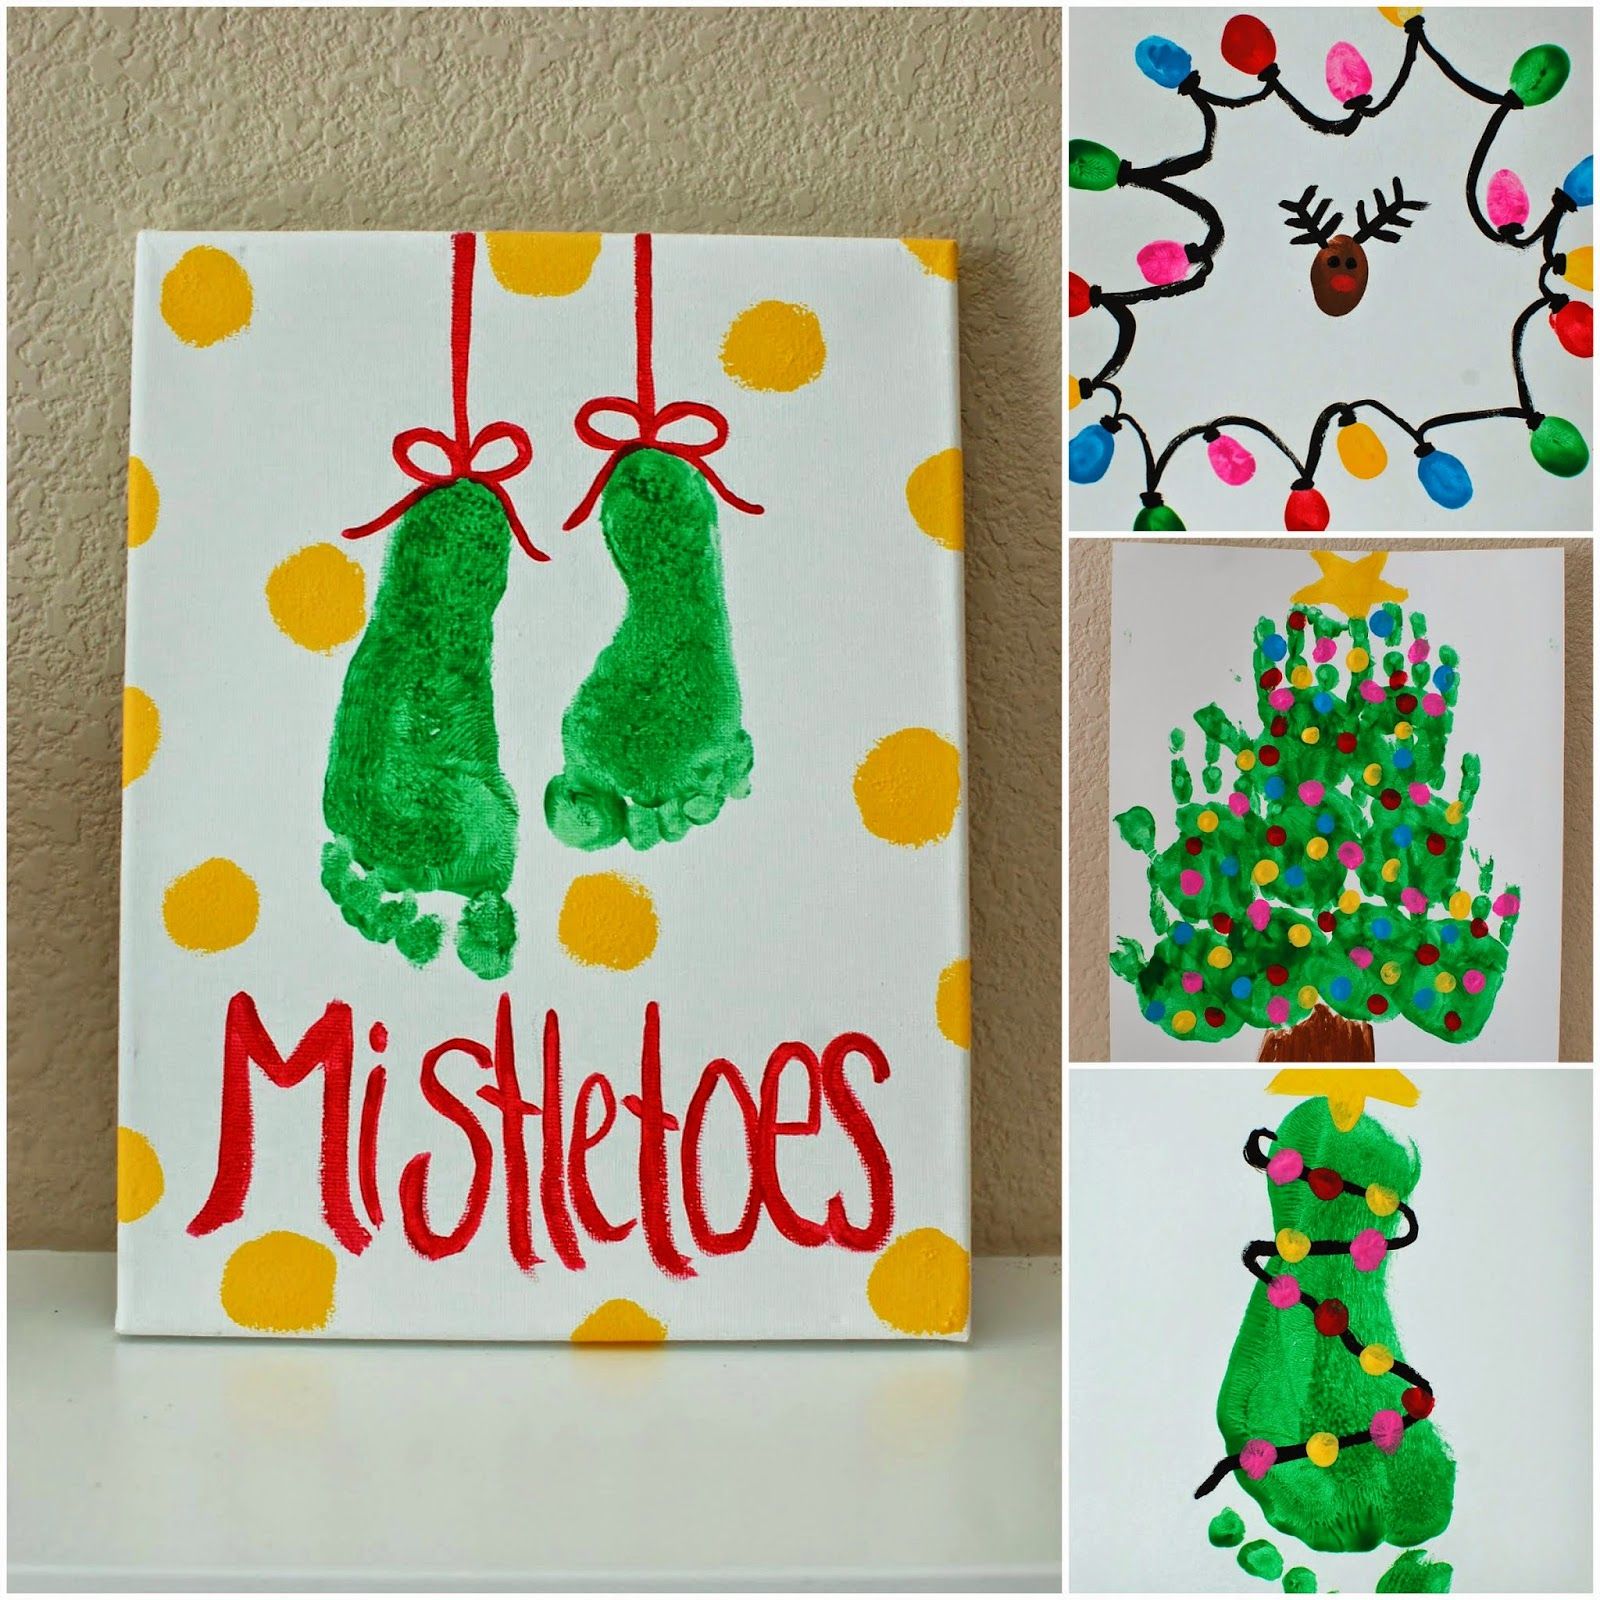 15 Awesome Christmas Cards to Make With Kids | Pretty cards ...